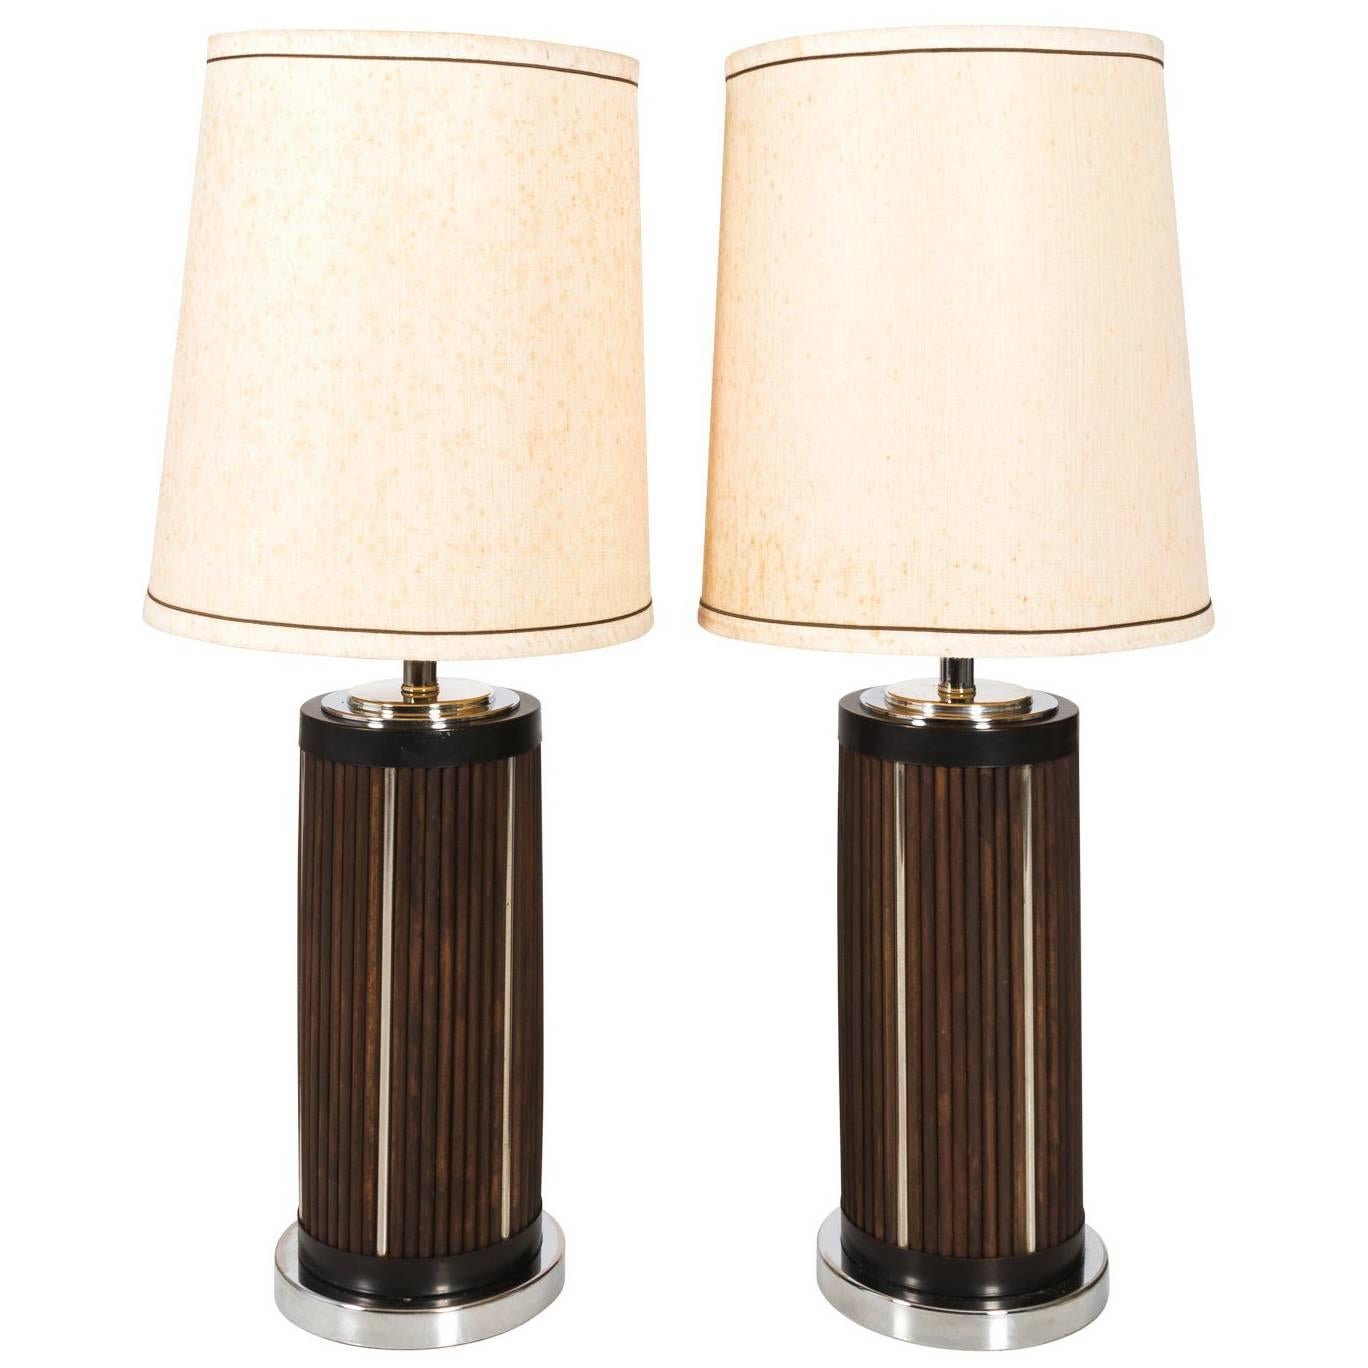 Pair of Midcentury Wood and Chrome Lamps For Sale